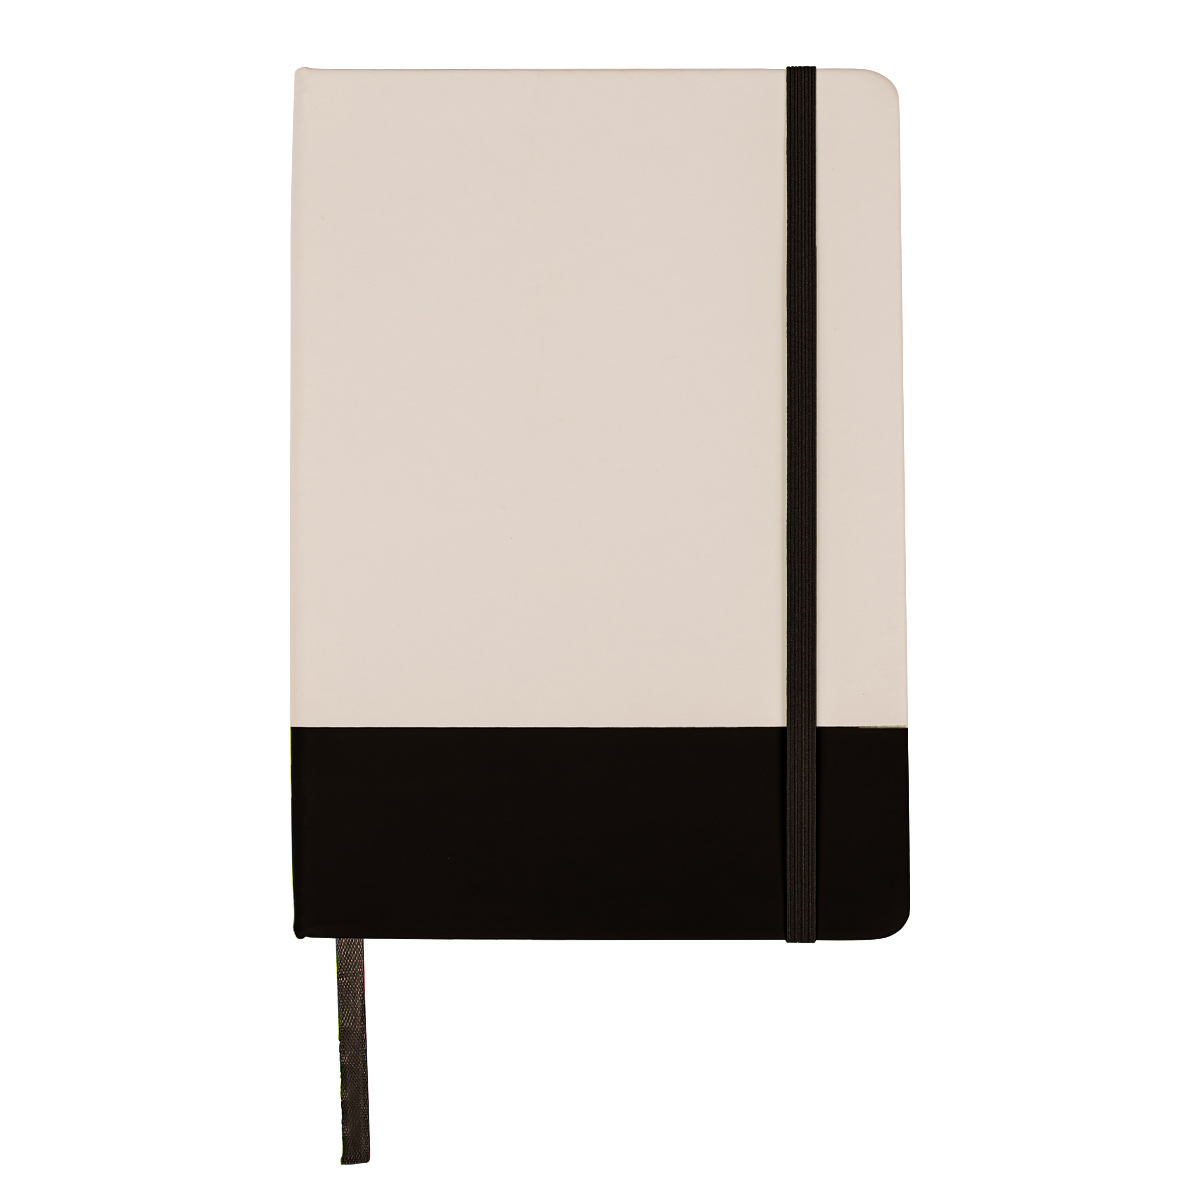 RioColour Notebook Product Image